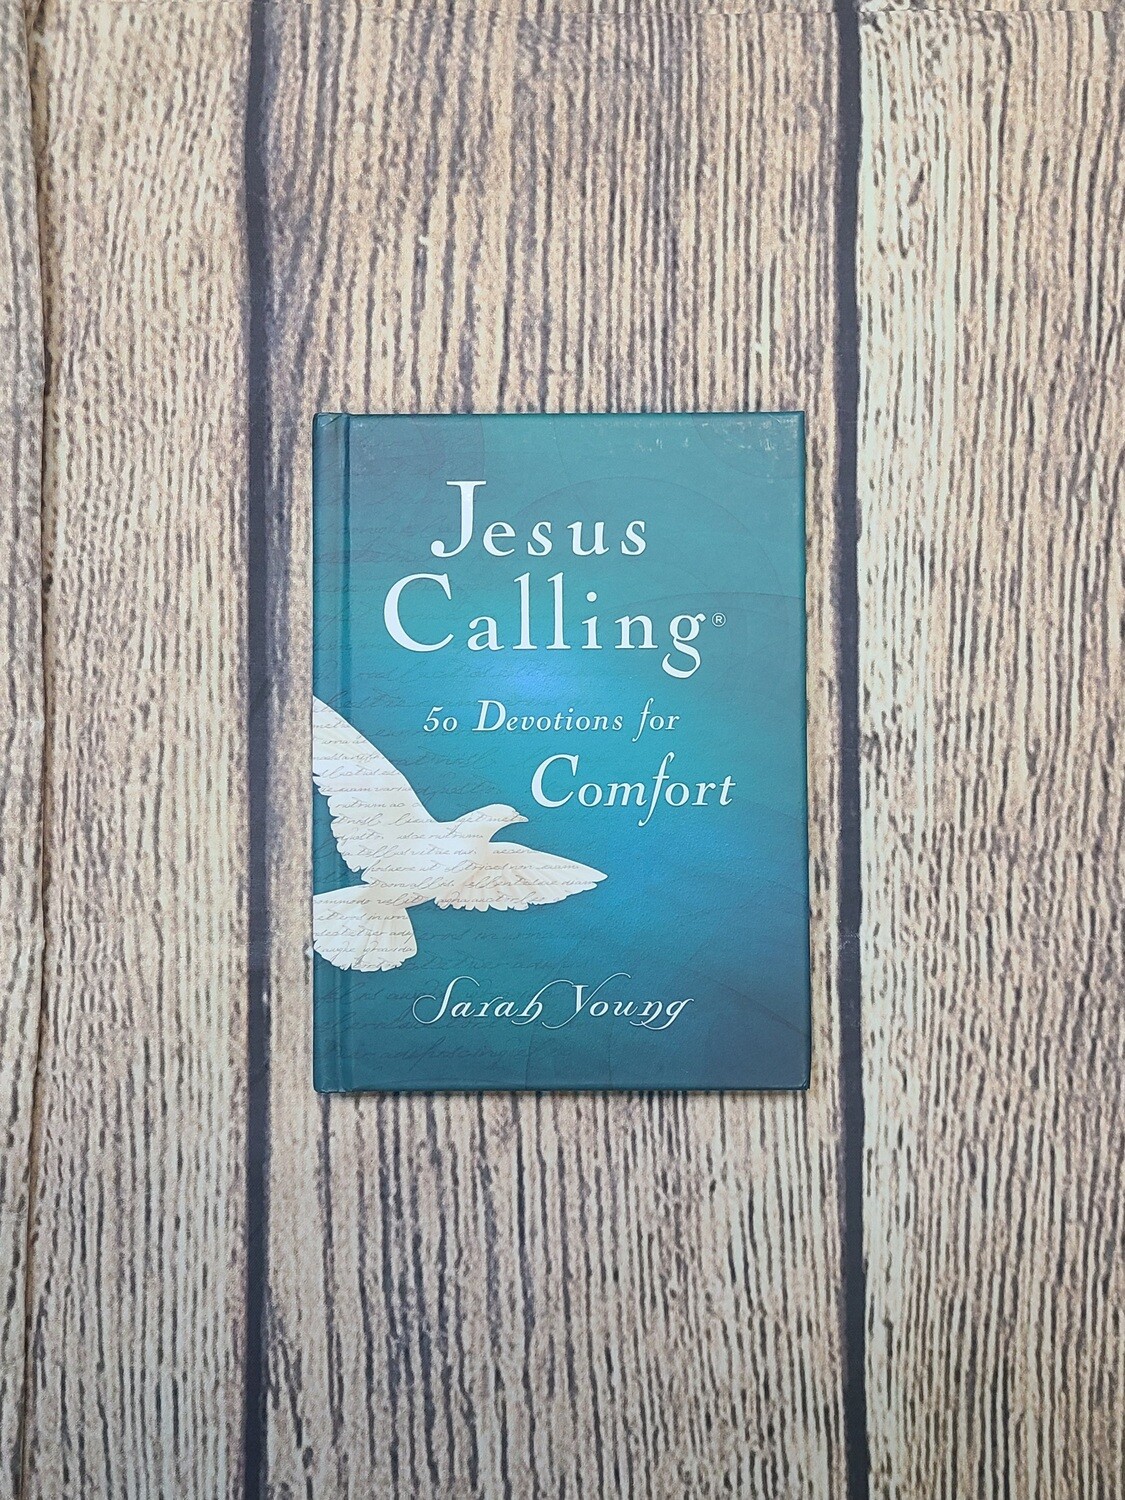 Jesus Calling: 50 Devotions for Comfort by Sarah Young